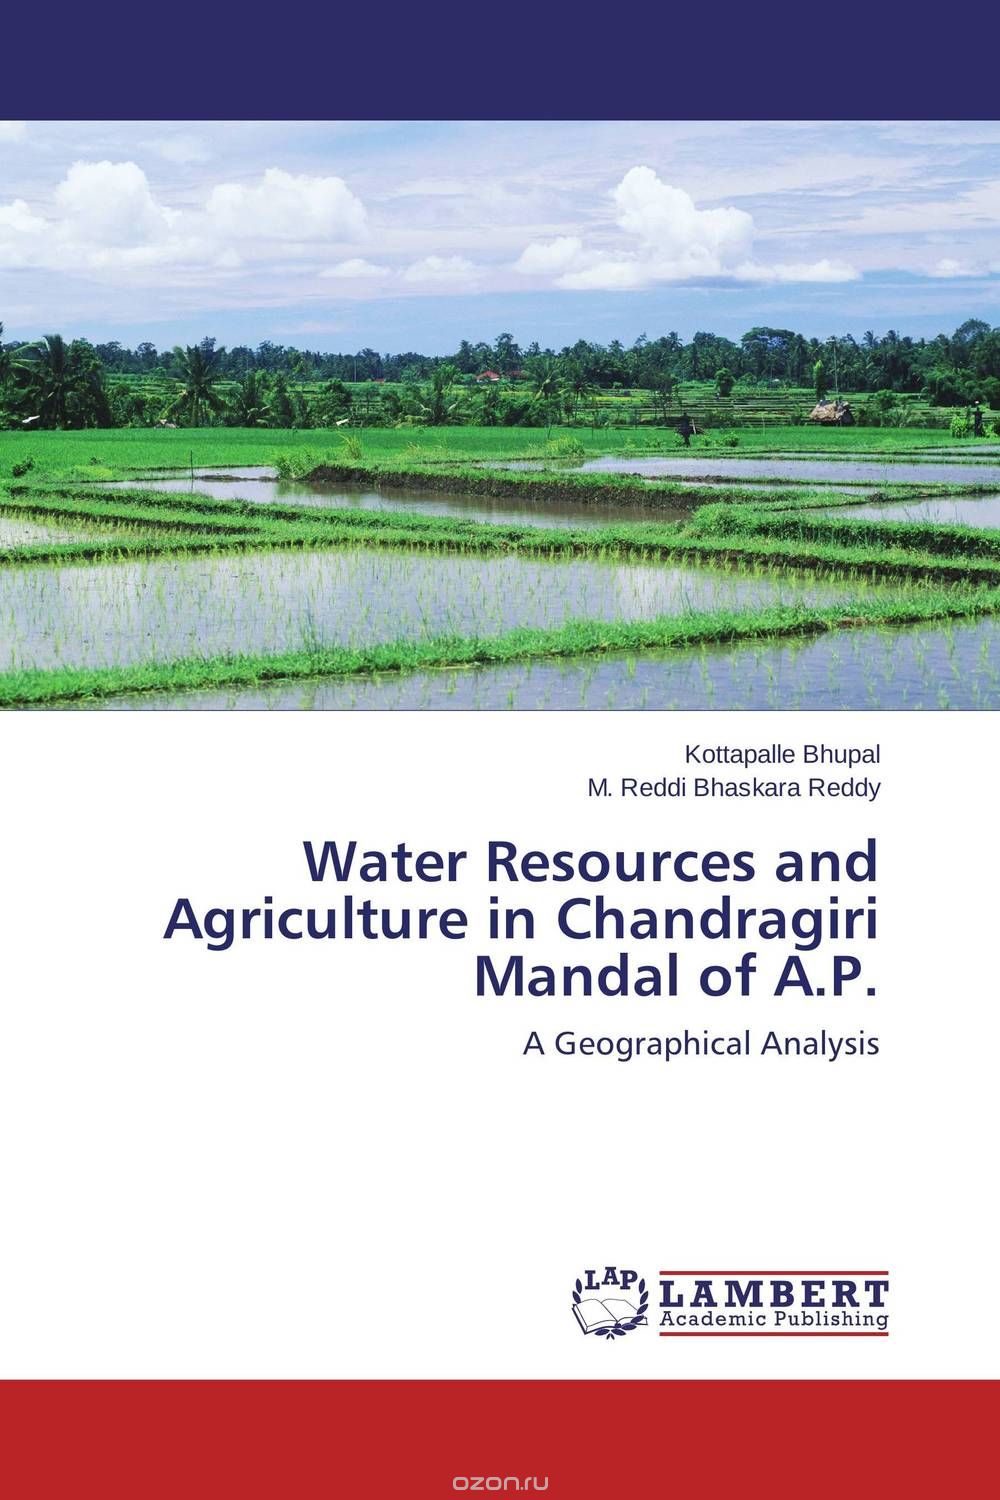 Water Resources and Agriculture in Chandragiri Mandal of  A.P.